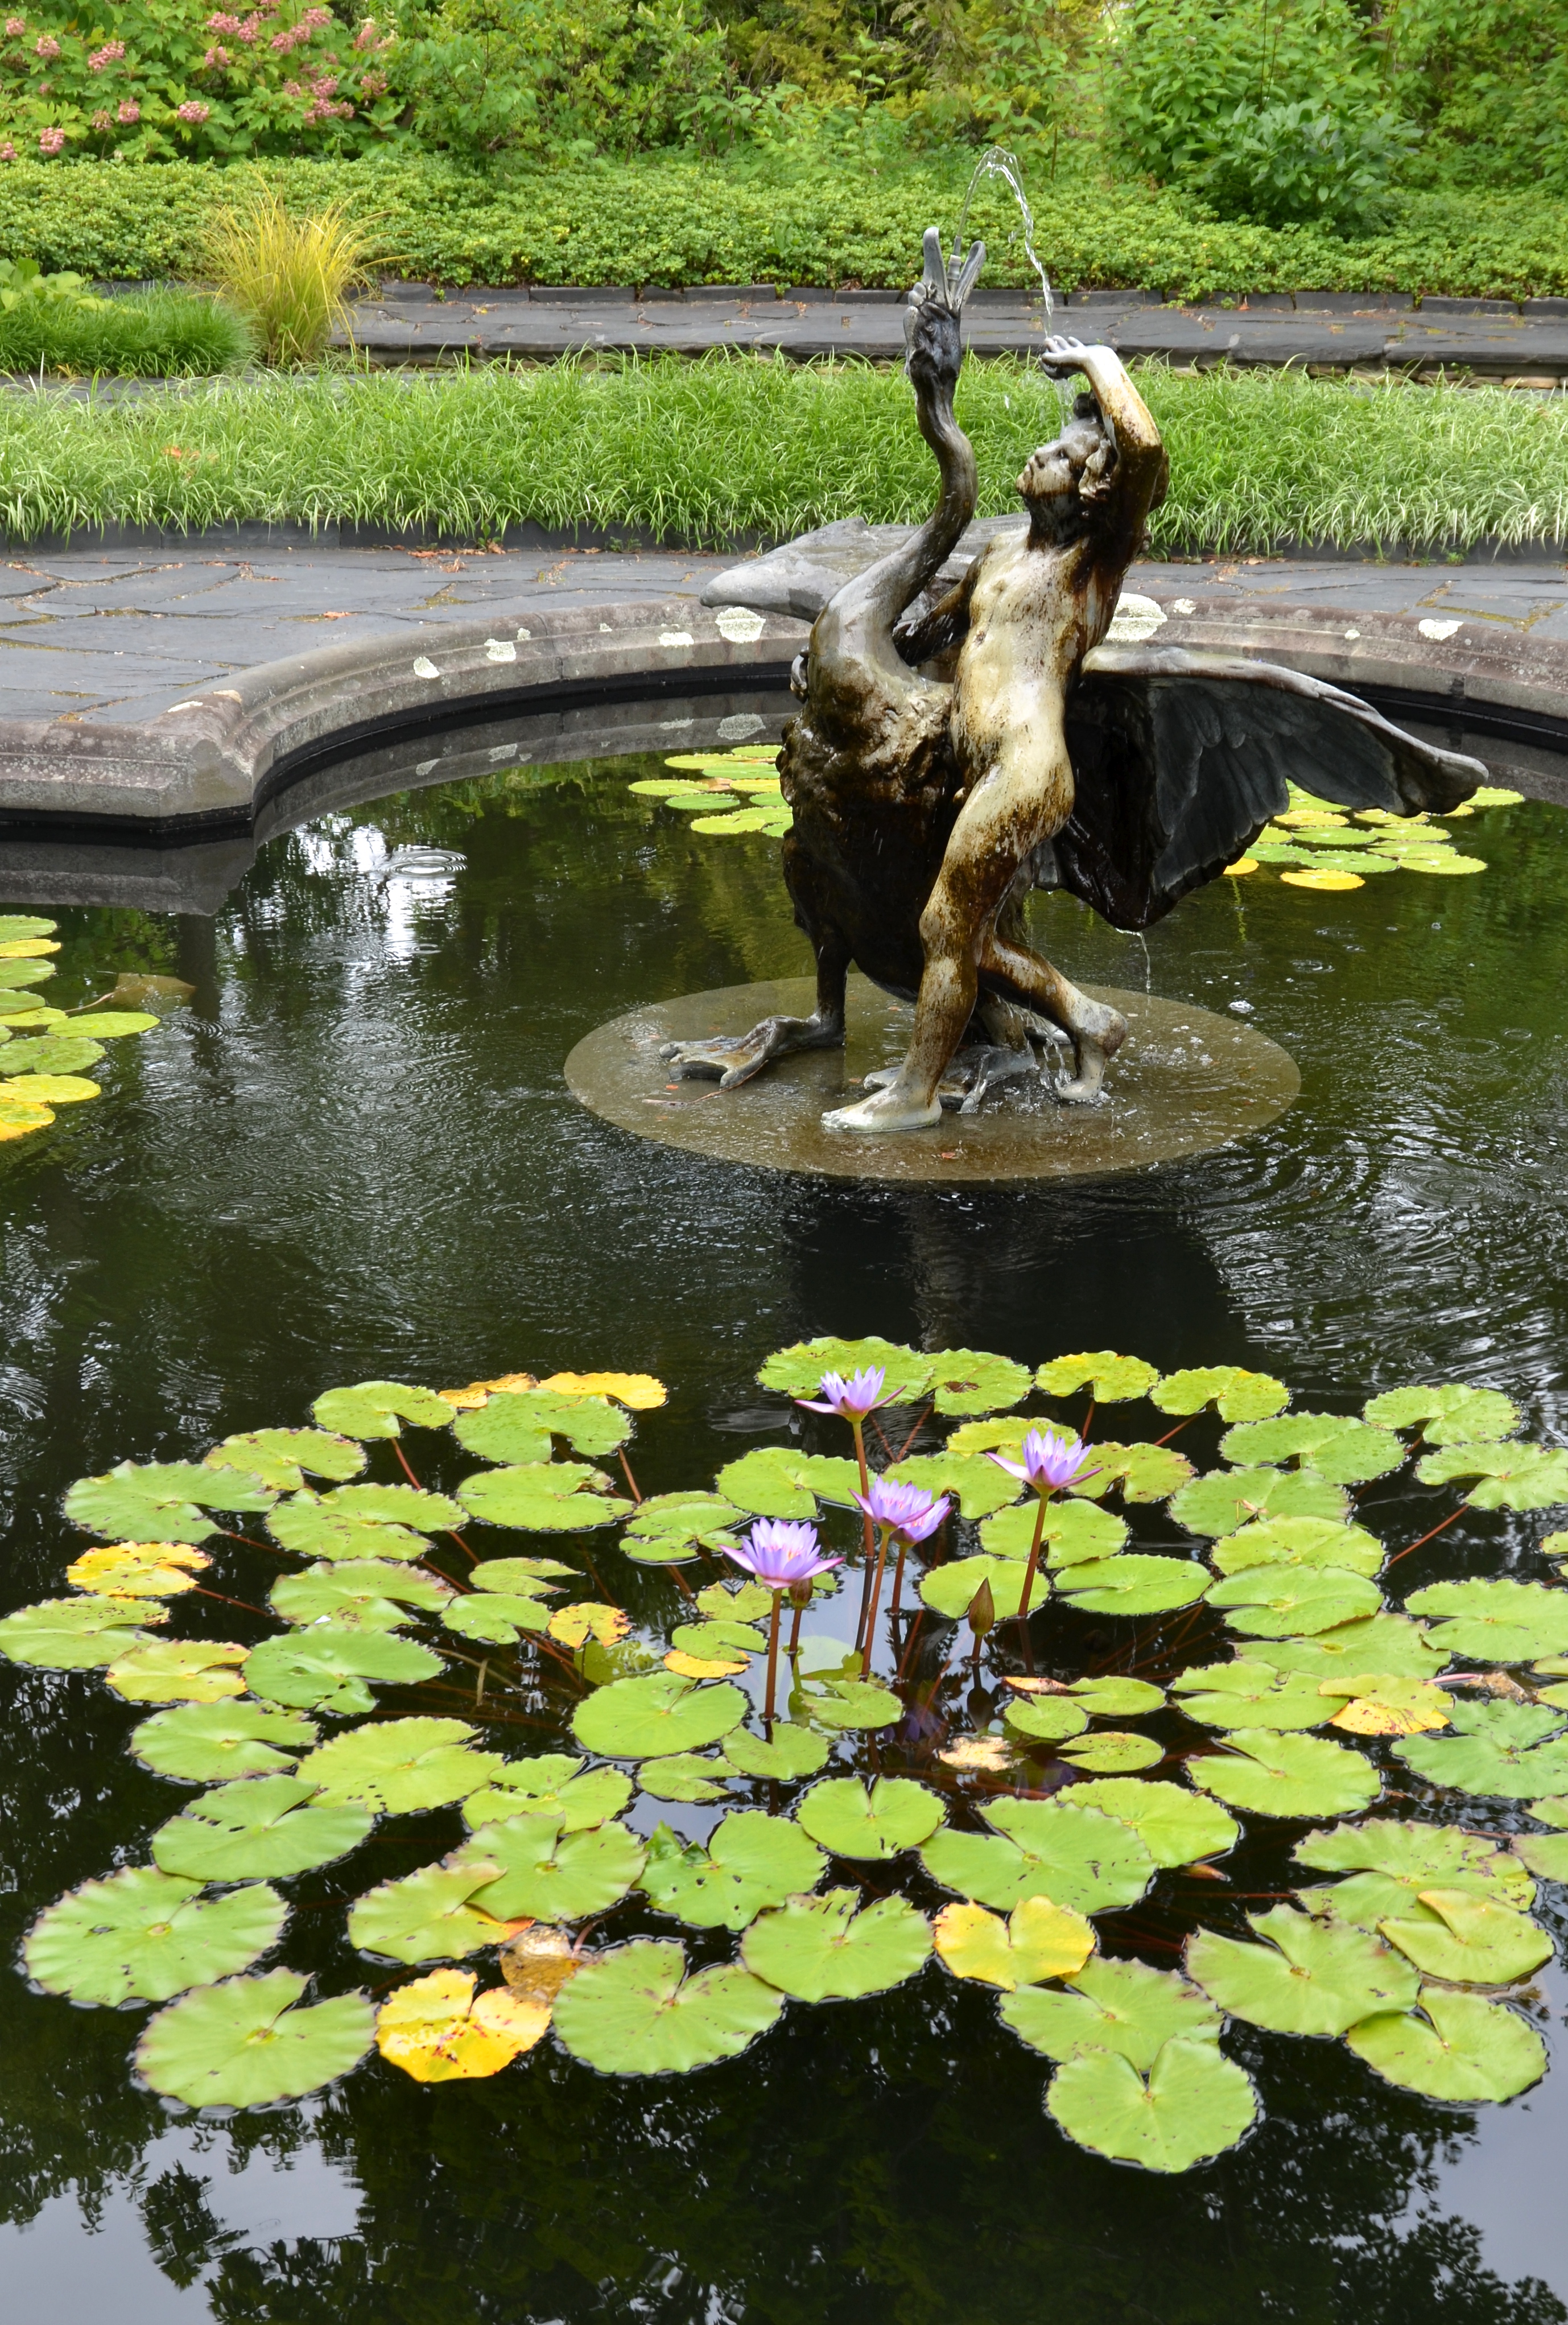 The Water Lily Garden at Ladew Topiary Garden